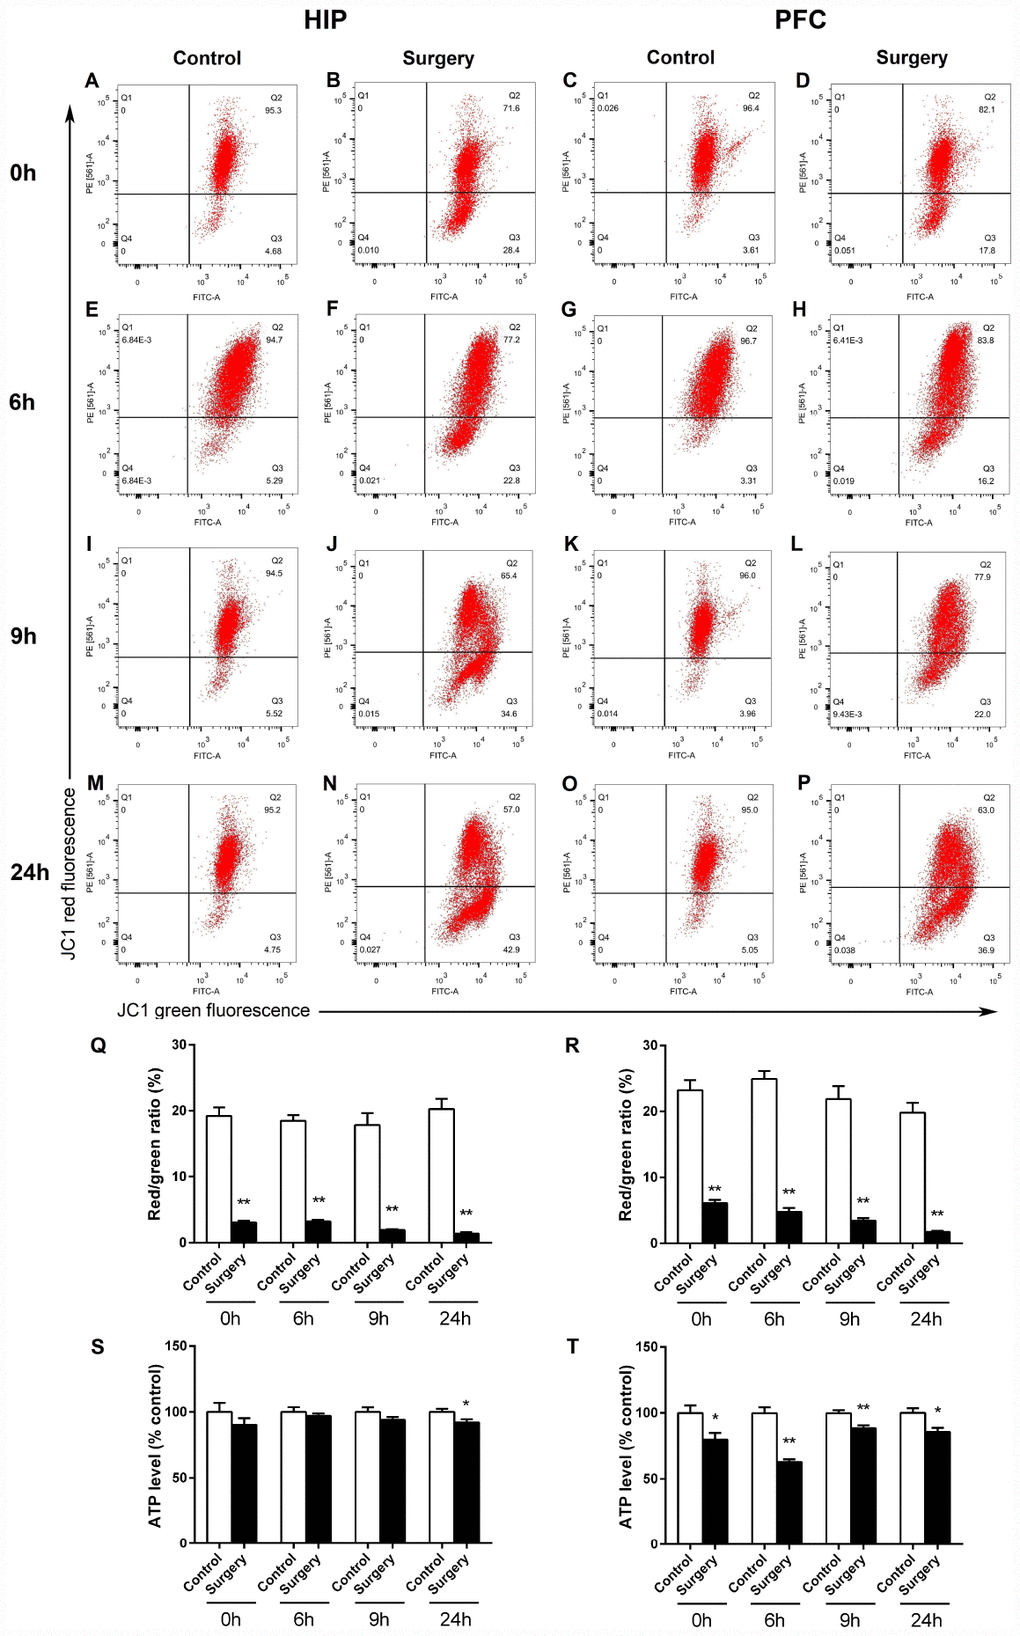 Surgery/Anesthesia altered the levels of MMP and ATP in the hippocampus and prefrontal cortex of aged mice at 0, 6, 9, and 24 hours postoperatively. Changes in MMP were measured using flow cytometry and JC-1. Representative graphs of flow cytometric analysis of the altered MMP level in the hippocampus (A, B, E, F, I, J, M, N) and prefrontal cortex (C, D, G, H, K, L, O, P) of mice after incubation with JC-1. Statistical bar graphs show the changes of MMP detected using flow cytometry. The changes of MMP in the hippocampal (Q) and prefrontal cortex tissues (R) were defined as the ratio of red/green fluorescence intensity. Surgery/Anesthesia reduced the MMP level in the hippocampus and prefrontal cortex as compared to the control condition in mice immediately after Surgery/ Anesthesia. (S) Surgery/Anesthesia decreased the ATP level in the hippocampus at 24 hours but not at 0, 6, or 9 hours postoperatively. (T) In the prefrontal cortex, Surgery/Anesthesia significantly decreased the level of ATP as compared to control condition in mice at all the postoperative timepoints. The data are plotted as the mean ± standard error of the mean for each group (n = 6). *p **p 